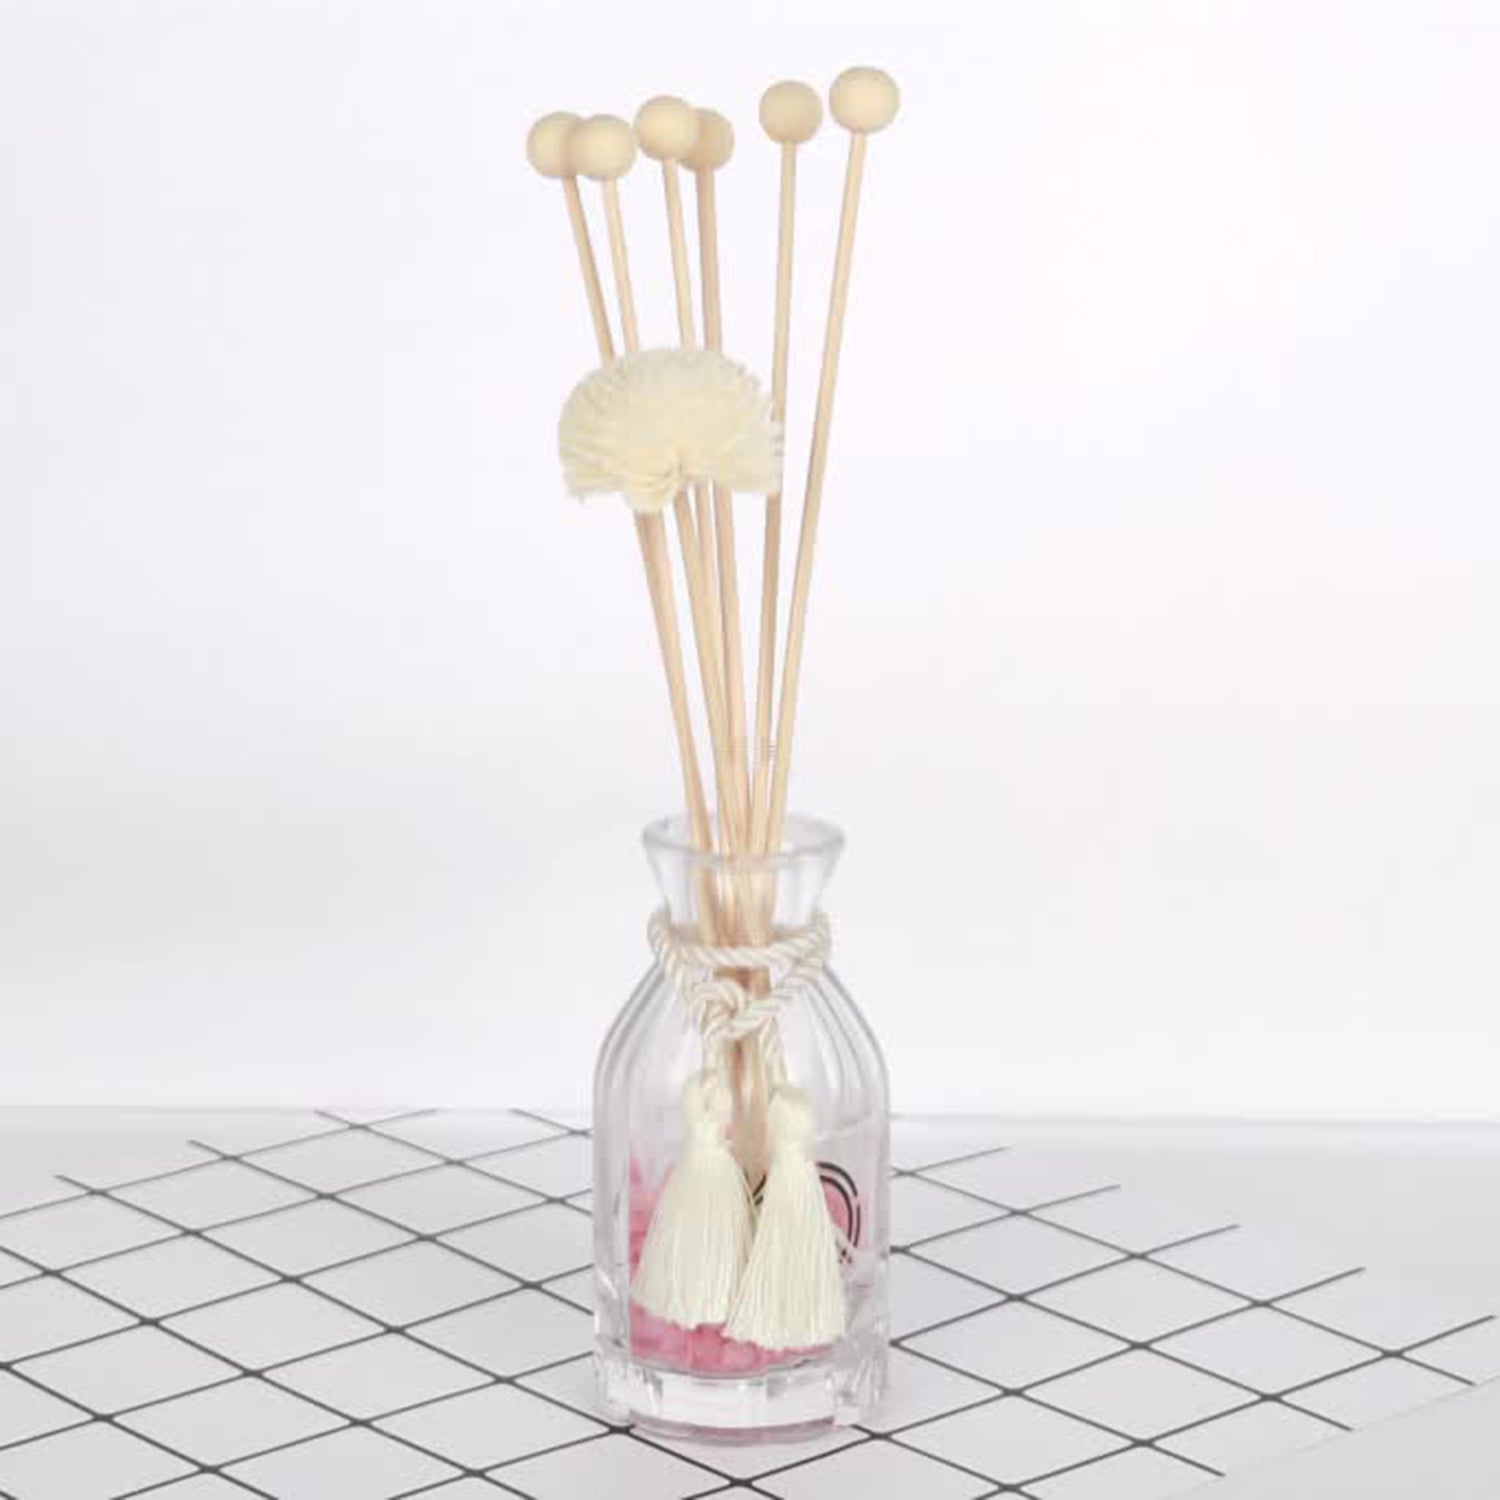 Rattan Reed Sticks Special Waving Rolled Rattan Stick/Ball For Reed Diffuser Reed Diffuser Accessories OEM 